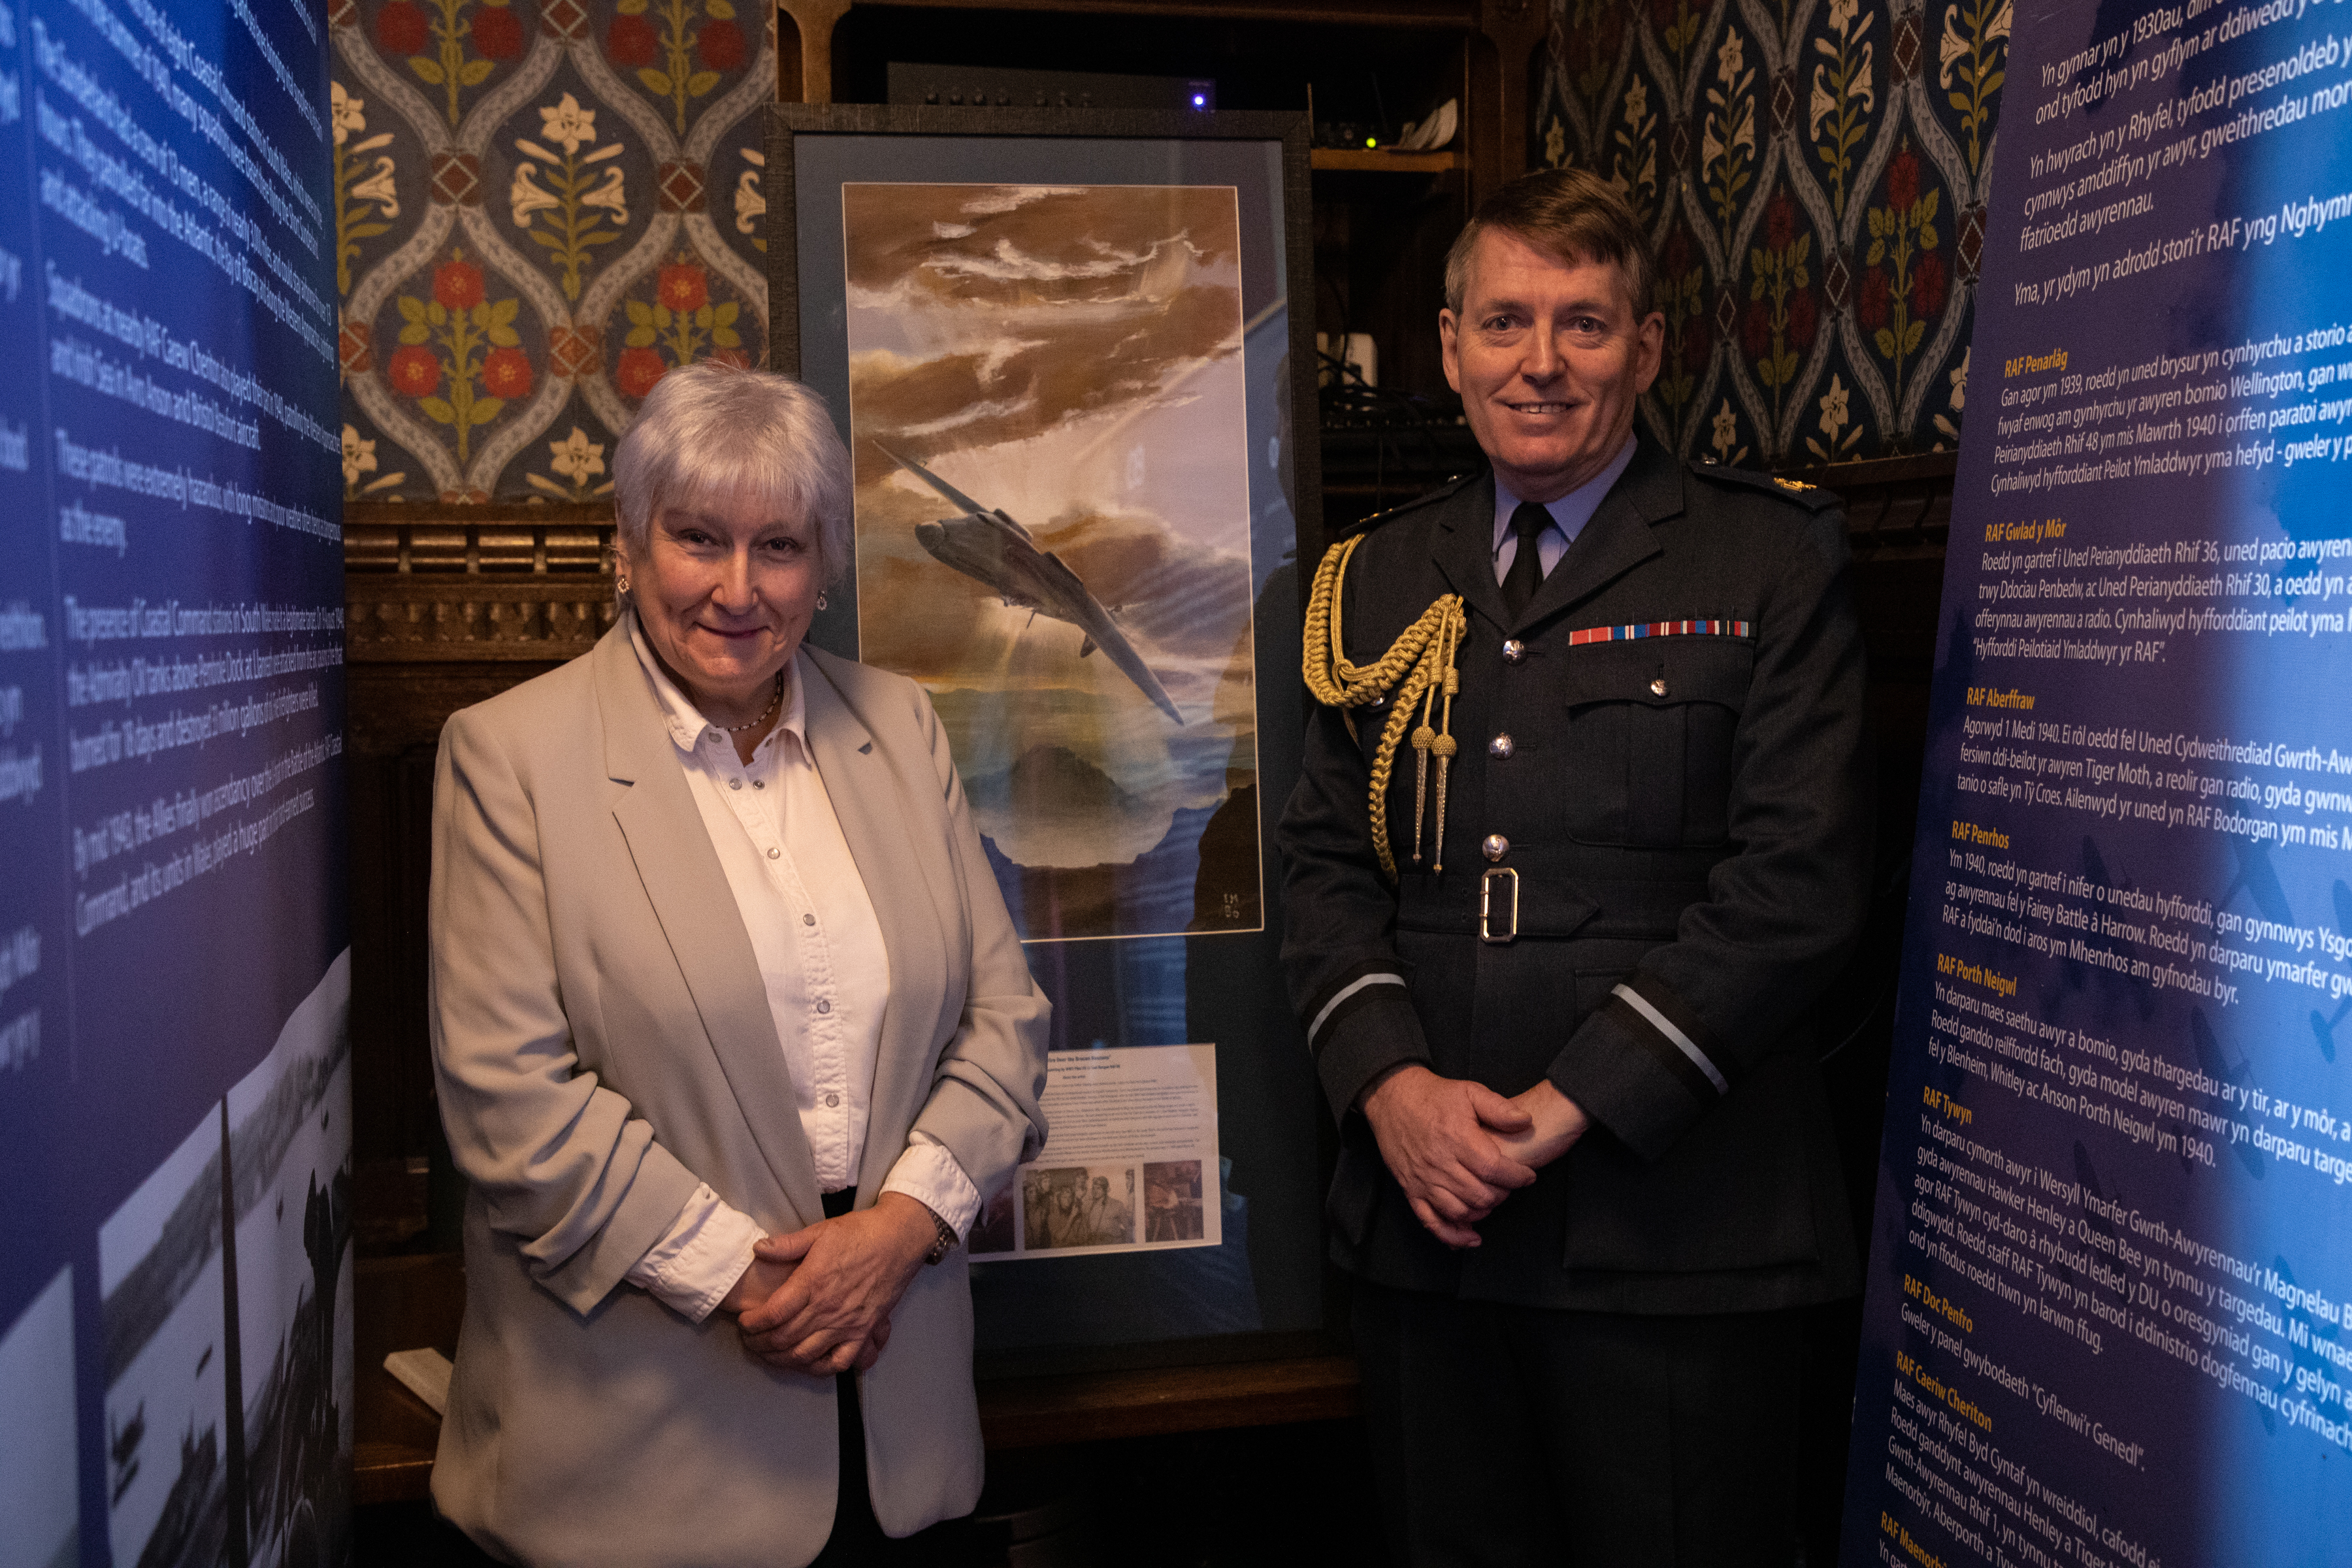 Image shows RAF aviator and civilian standing by pictures at exhibition.